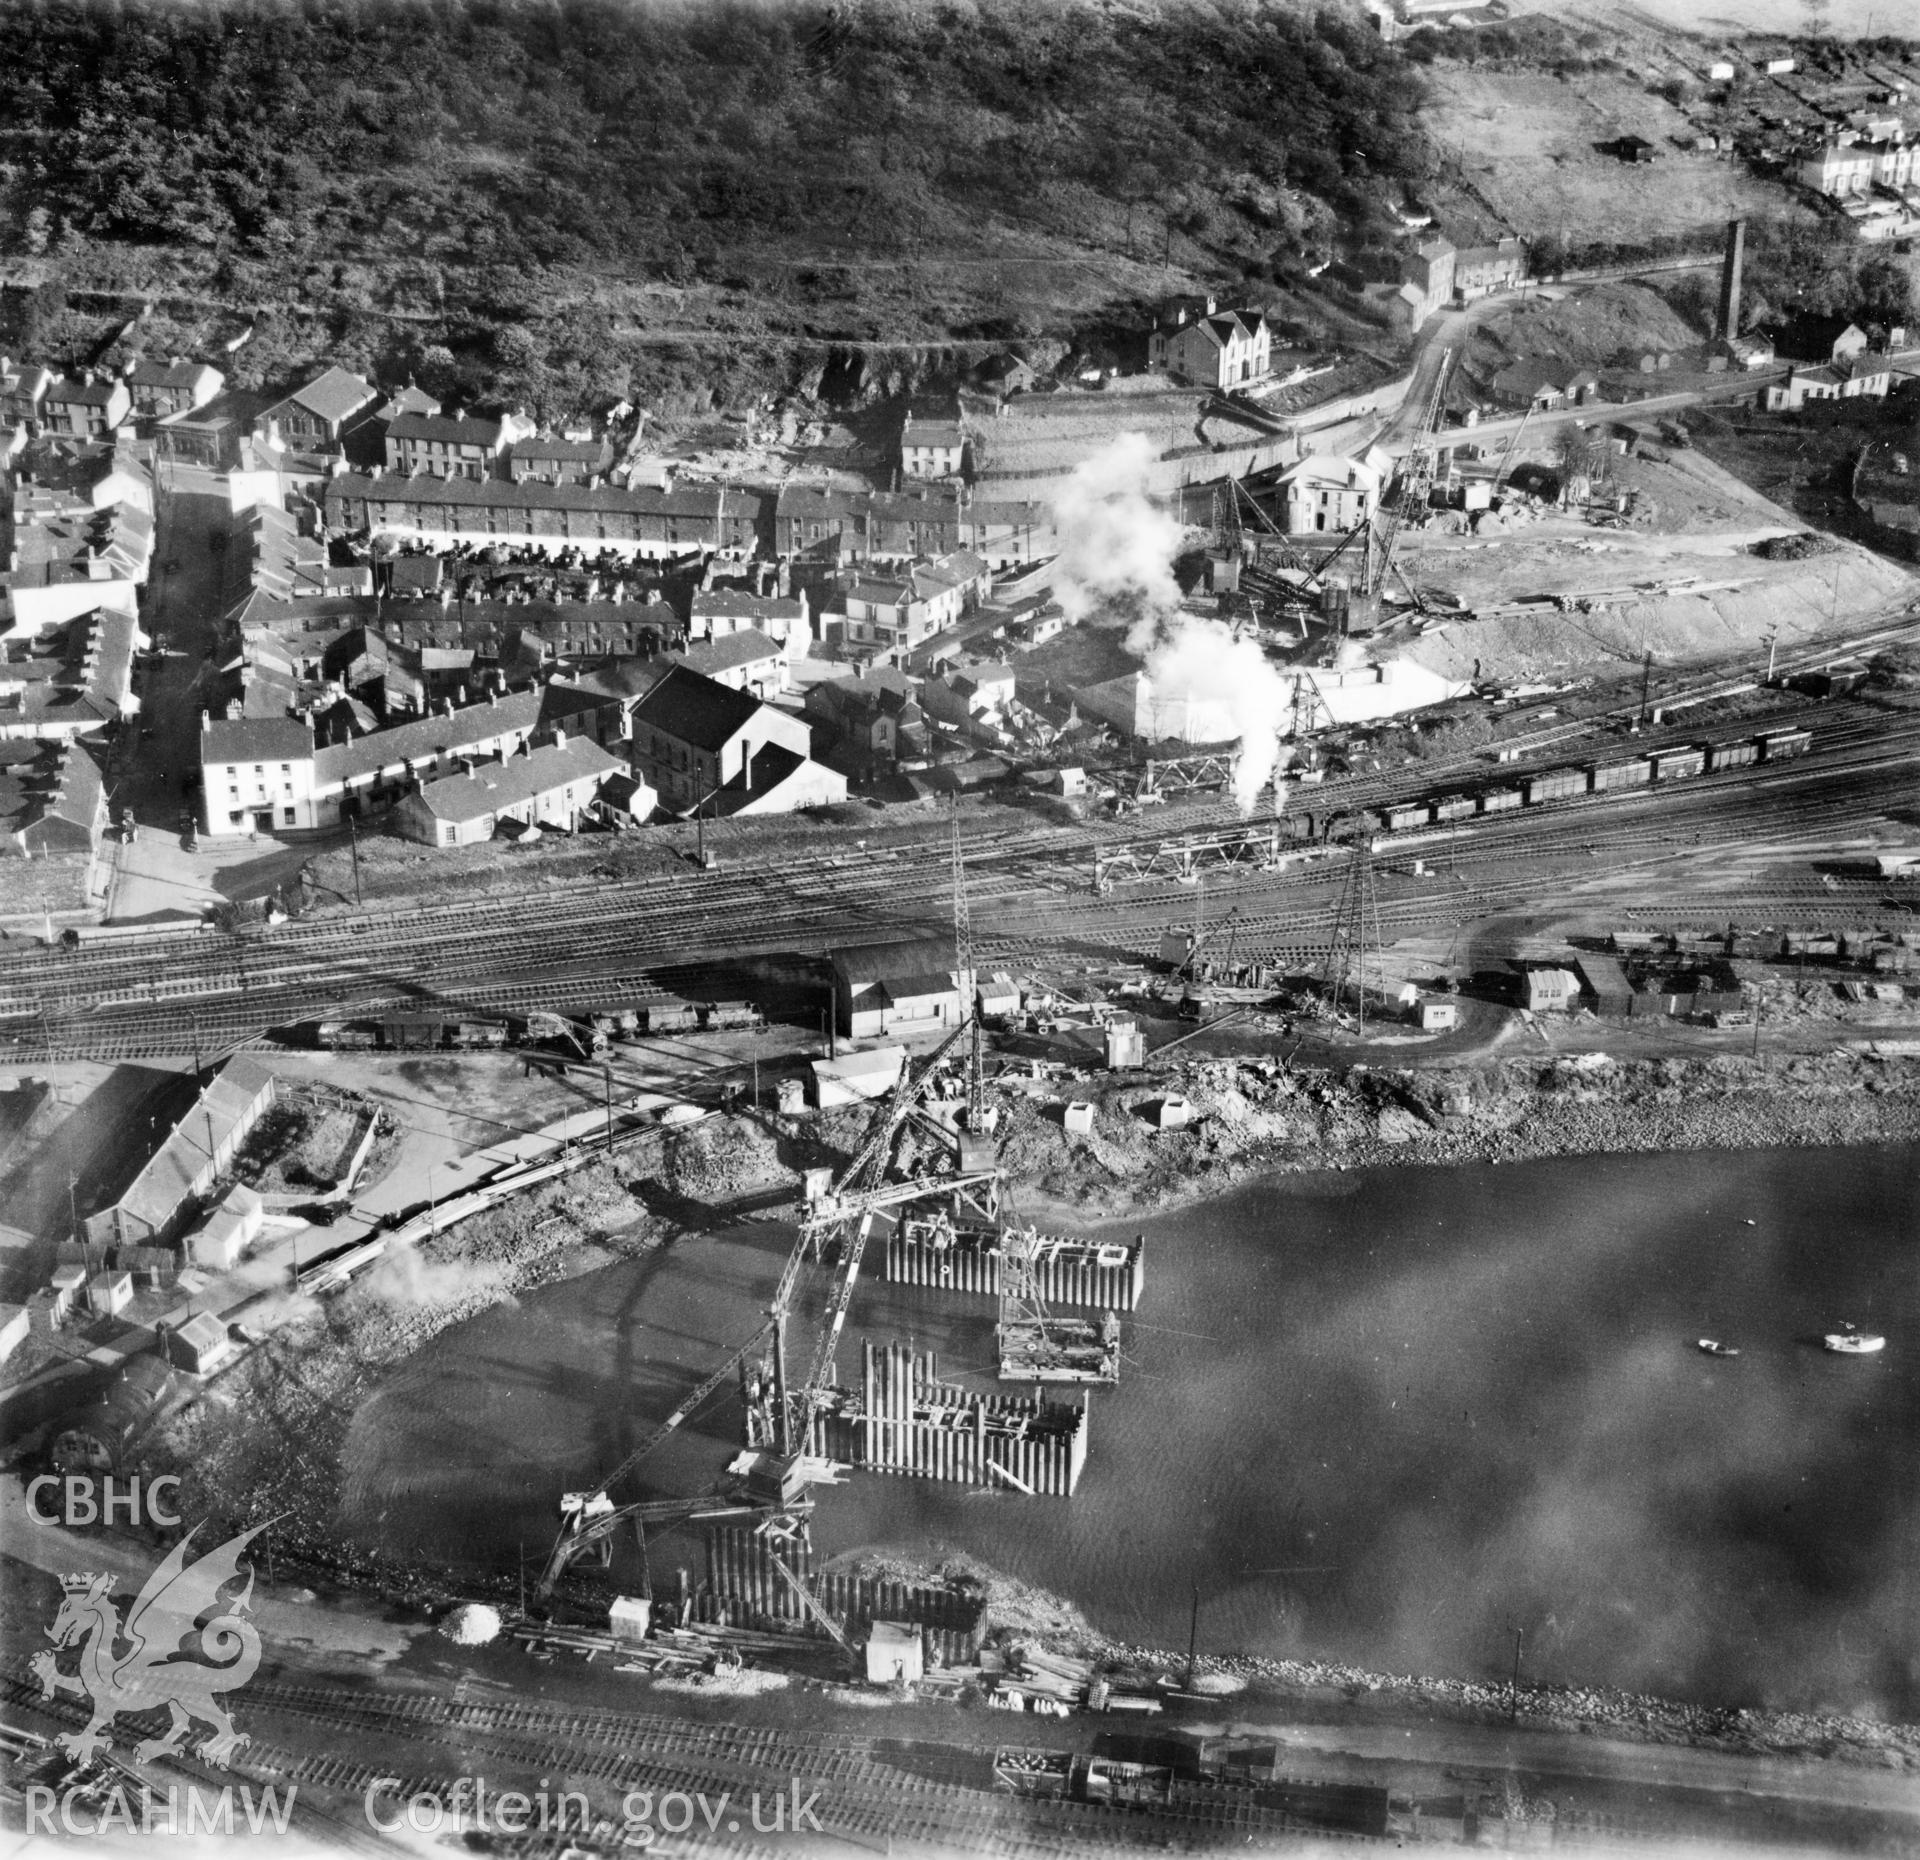 View of Briton Ferry and the Cleveland Bridge under construction. Oblique aerial photograph, 5?" cut roll film.